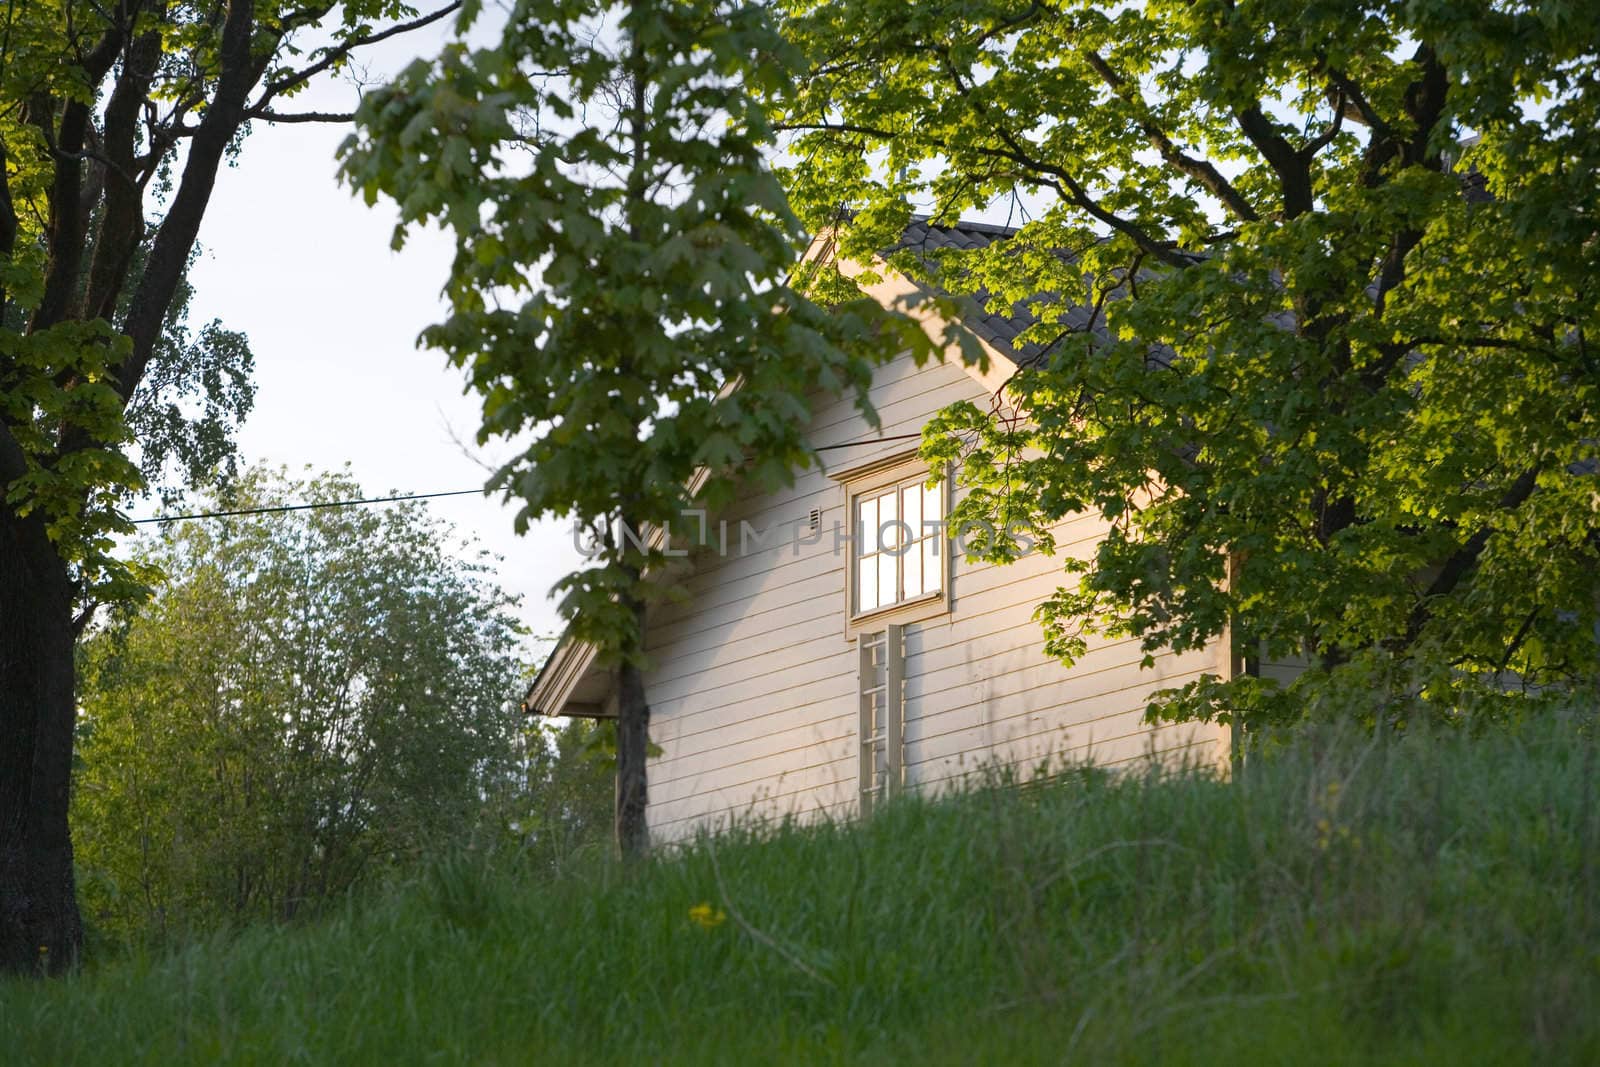 Lonely wooden house surrounded by a wild garden